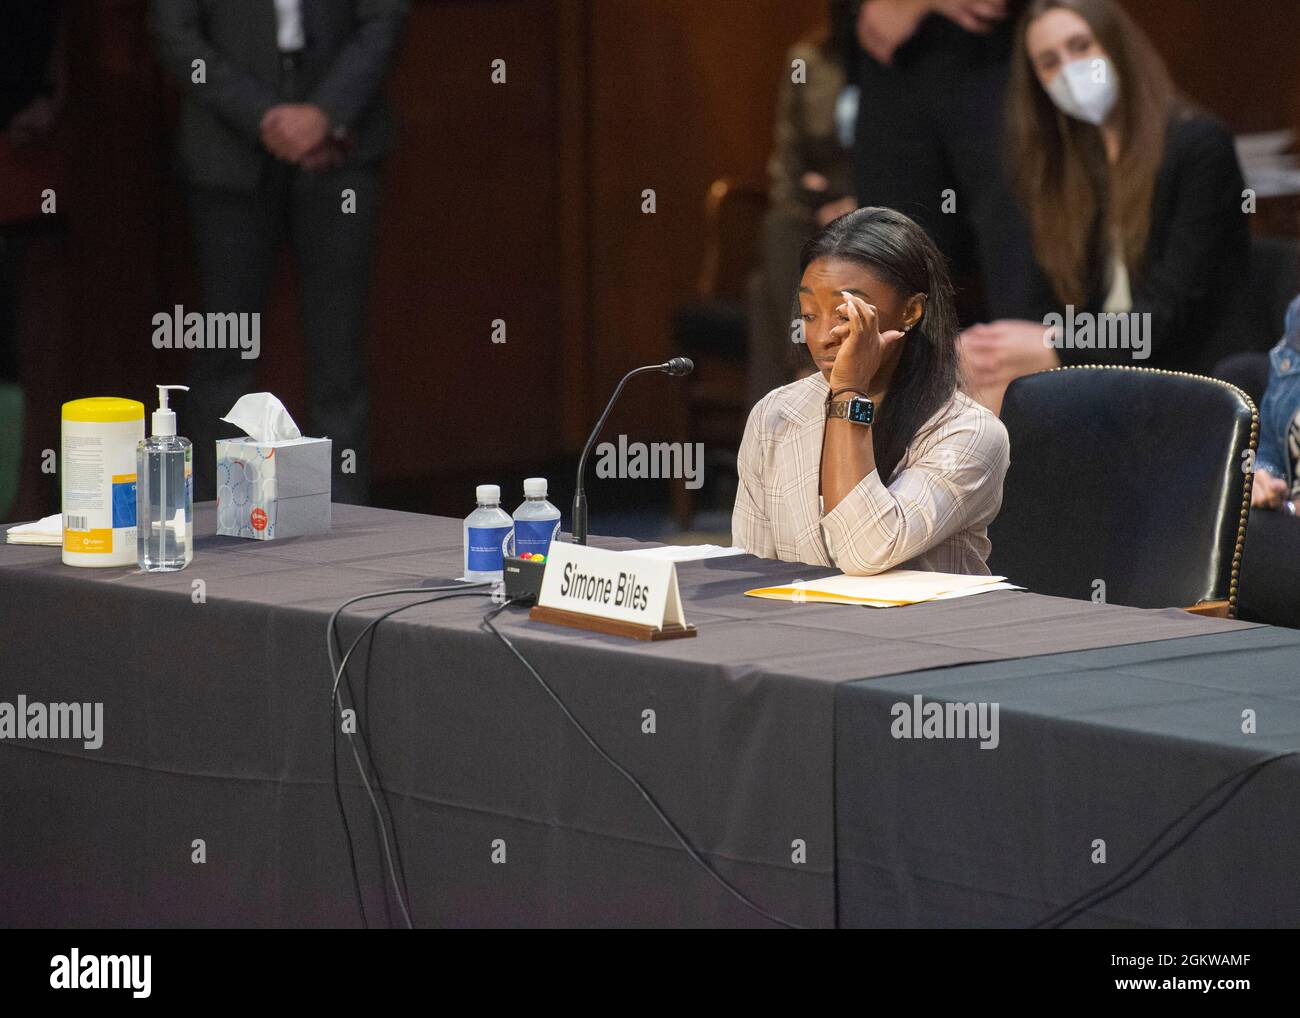 Washington DC, September 15, 2021, USA: Simone Biles keeps her emotions in check while testifying at a Senate hearing on the FBI's failure to respond Stock Photo